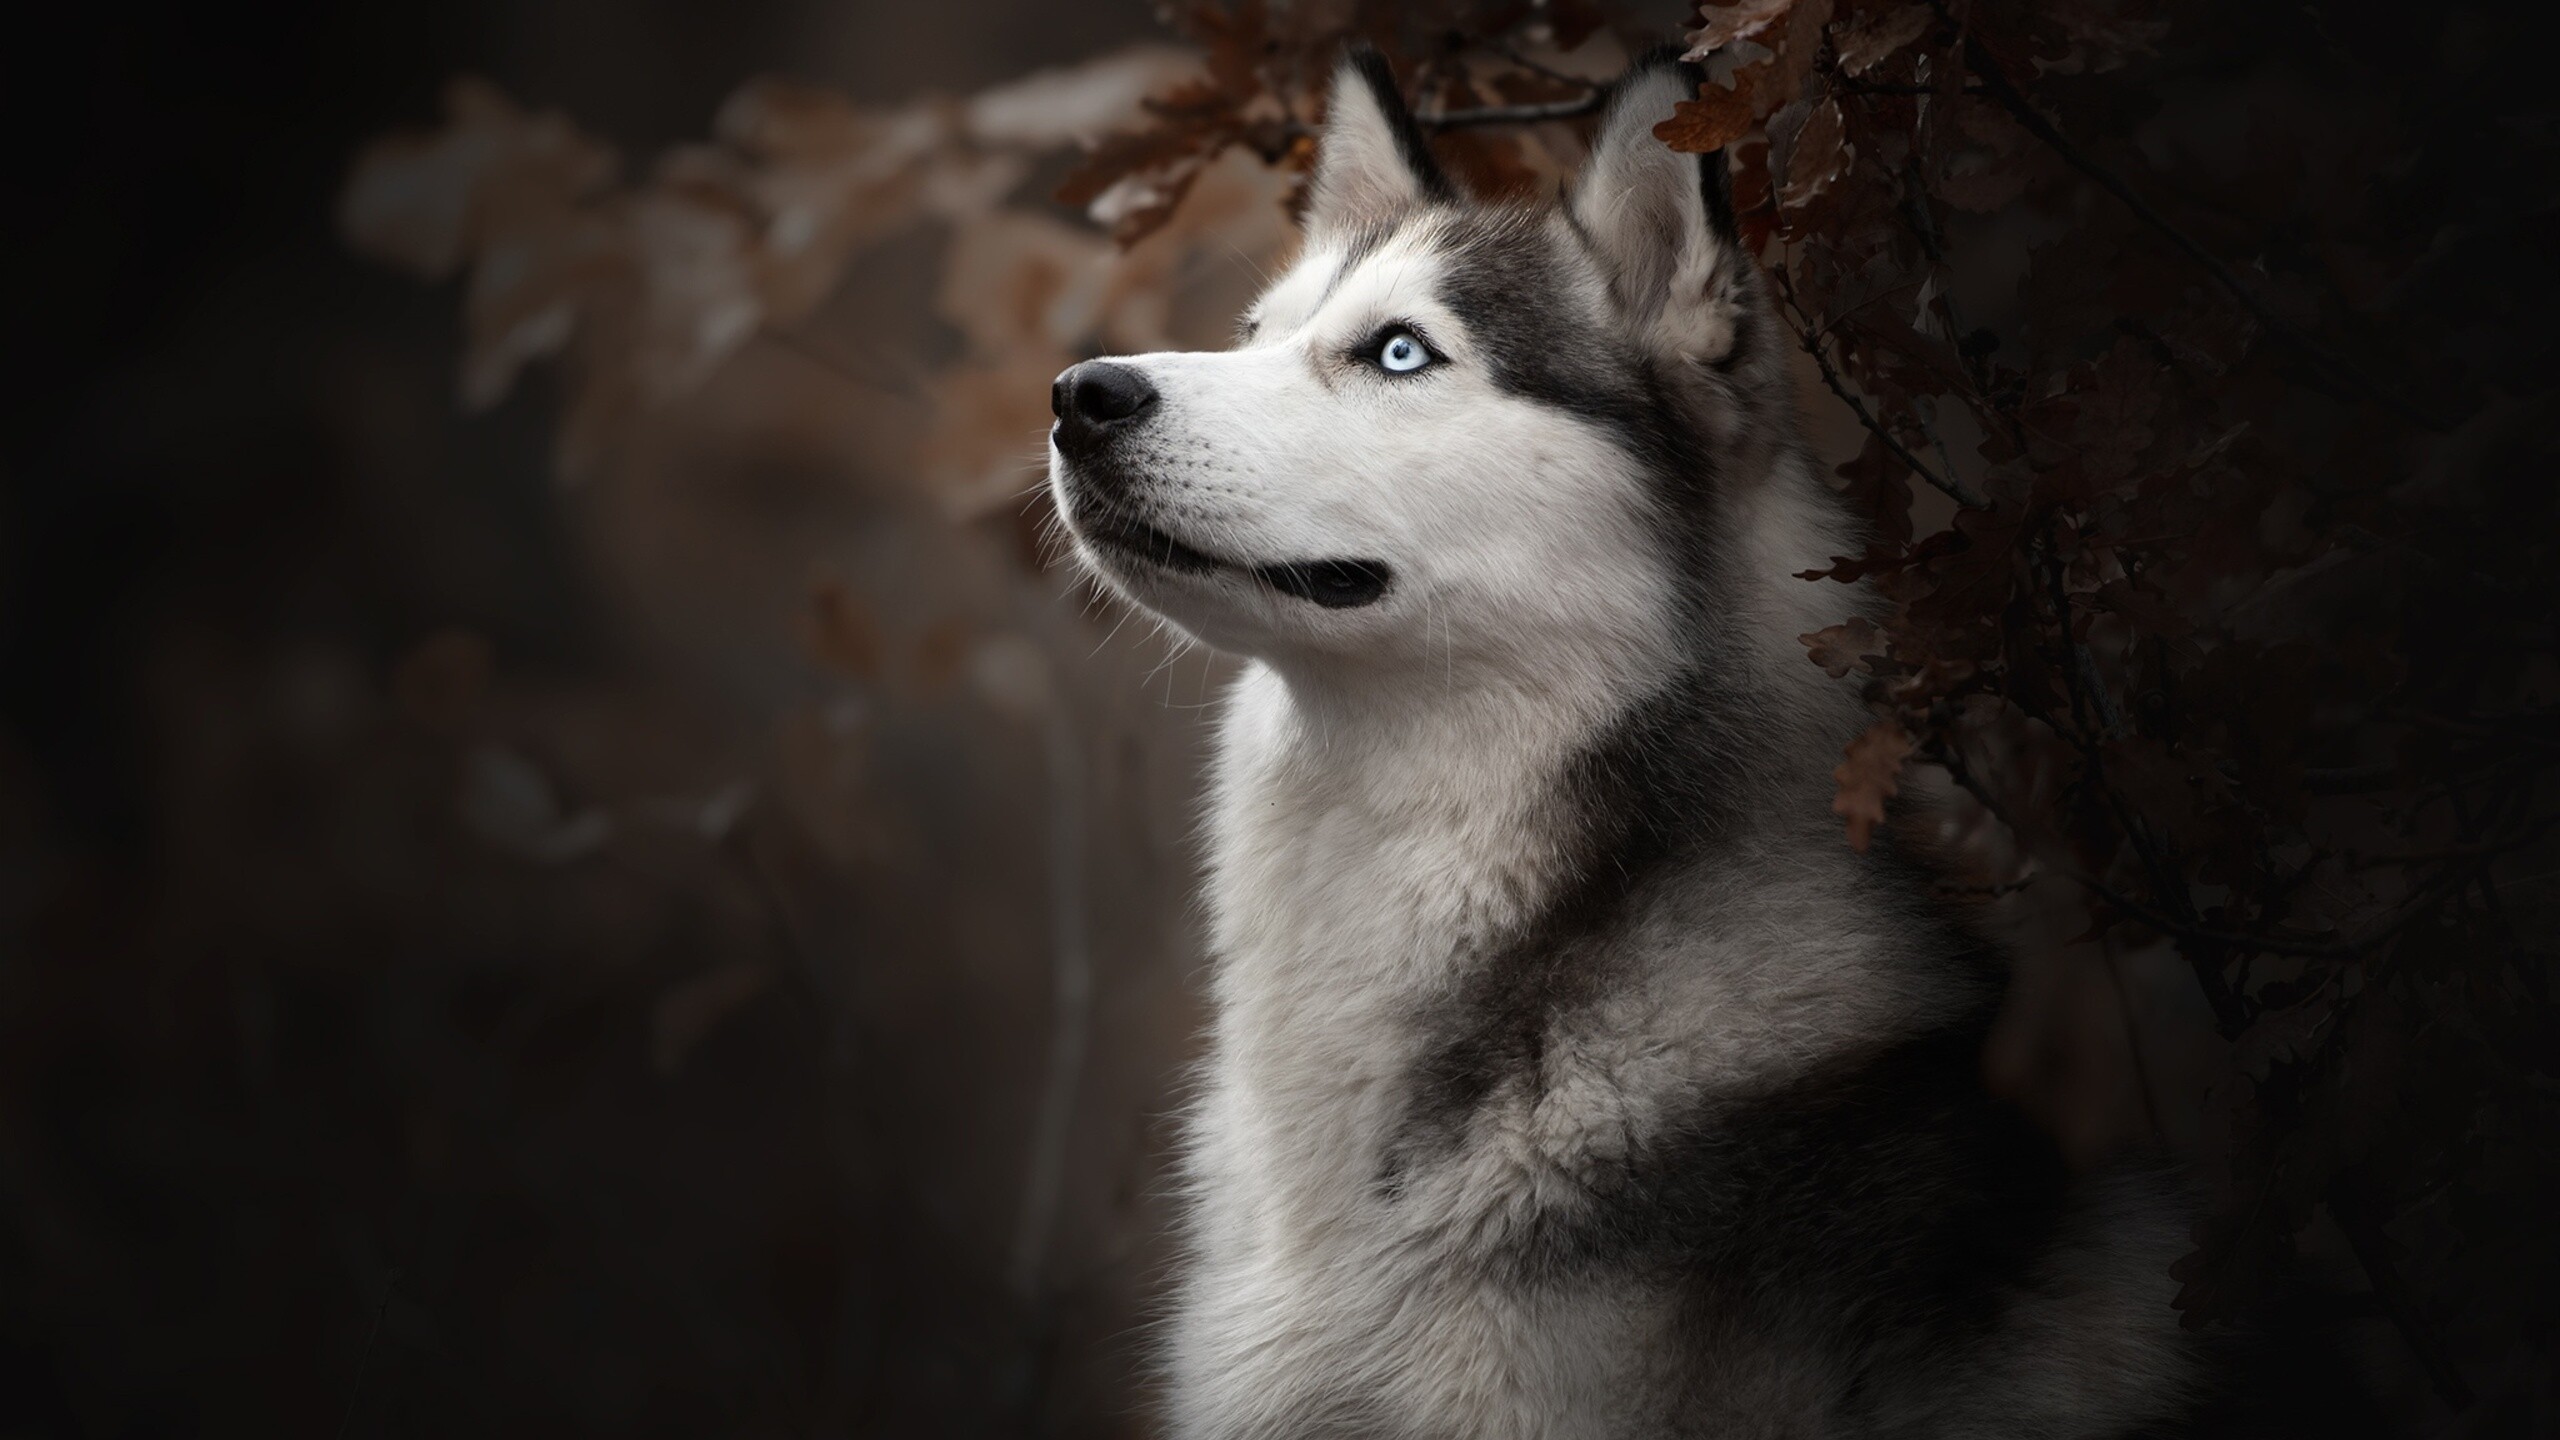 Siberian Husky: Dog breed, cannot be used as a guard dog. 2560x1440 HD Wallpaper.